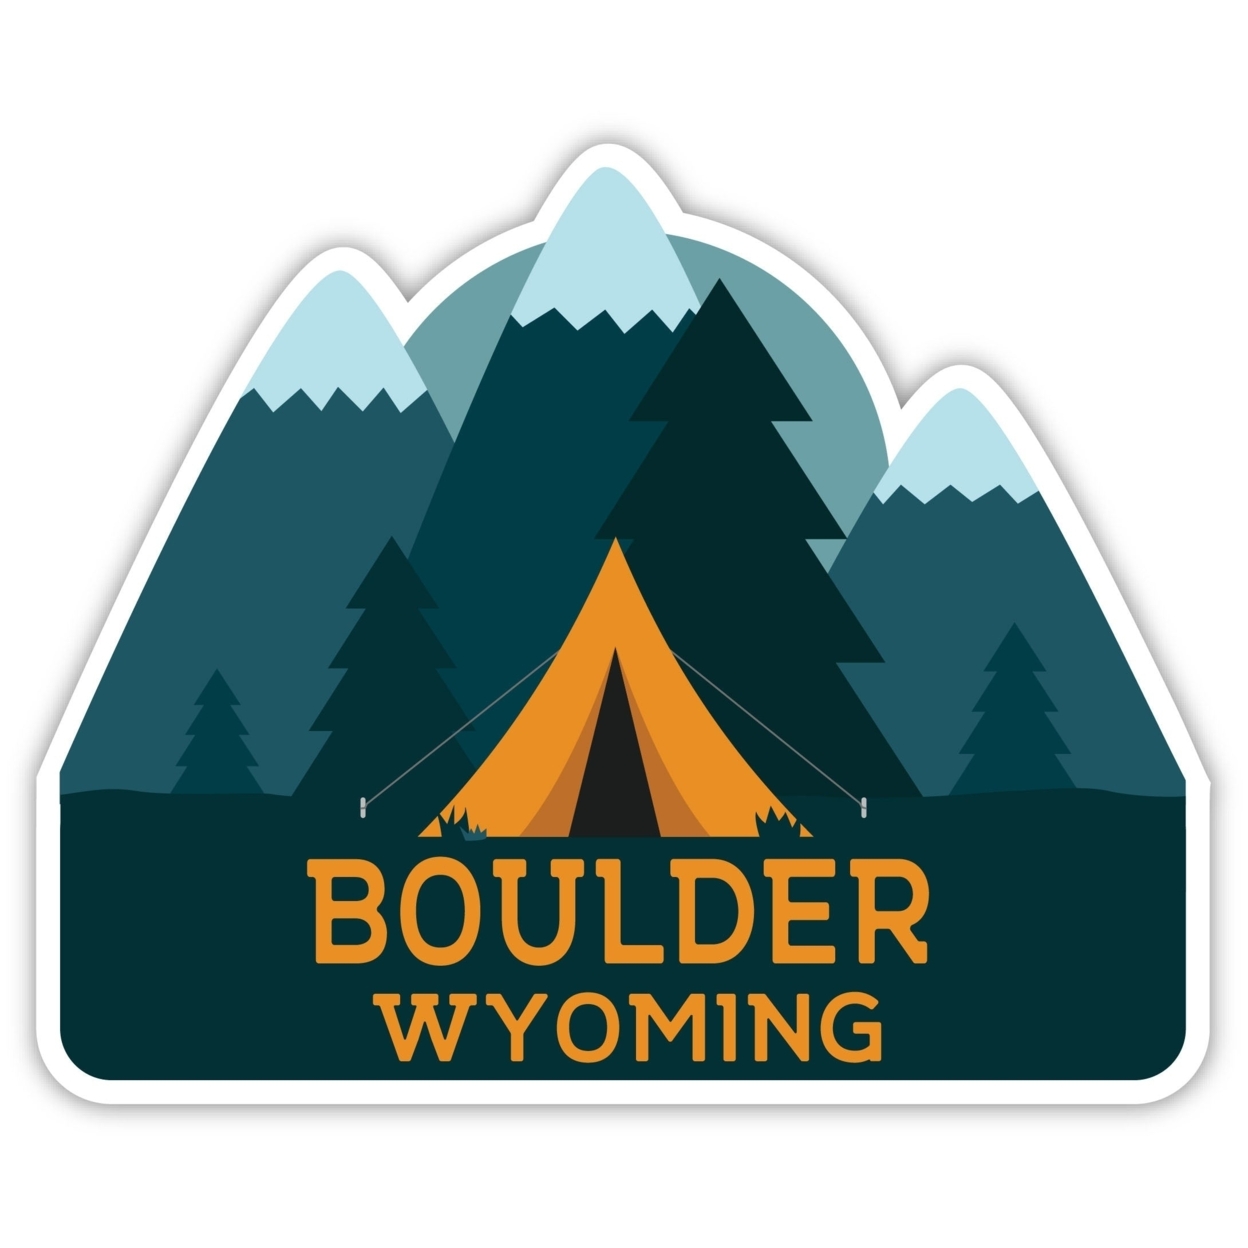 Boulder Wyoming Souvenir Decorative Stickers (Choose Theme And Size) - 4-Pack, 8-Inch, Tent